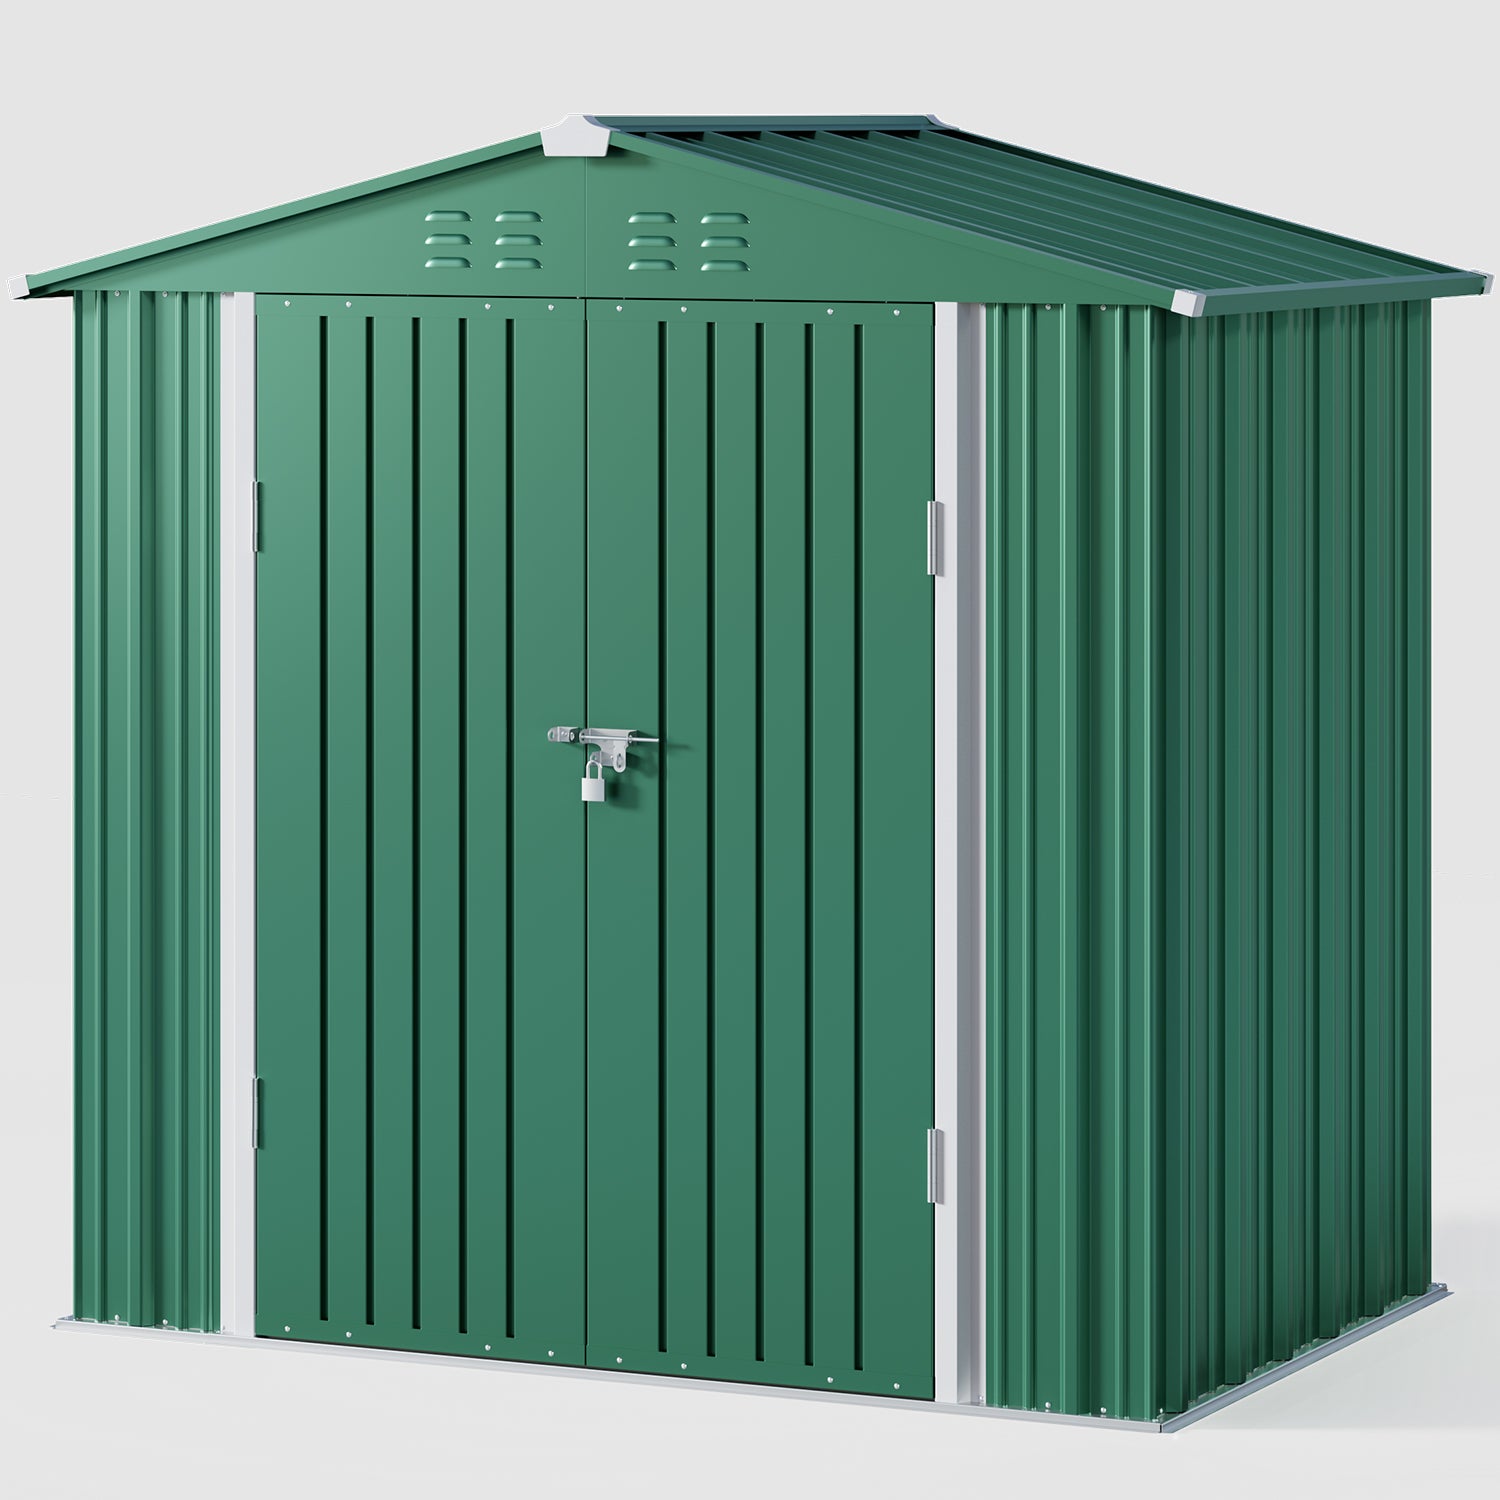 Gizoon CC11 Outdoor Storage Shed with Metal Base Frame and Double Lockable Doors